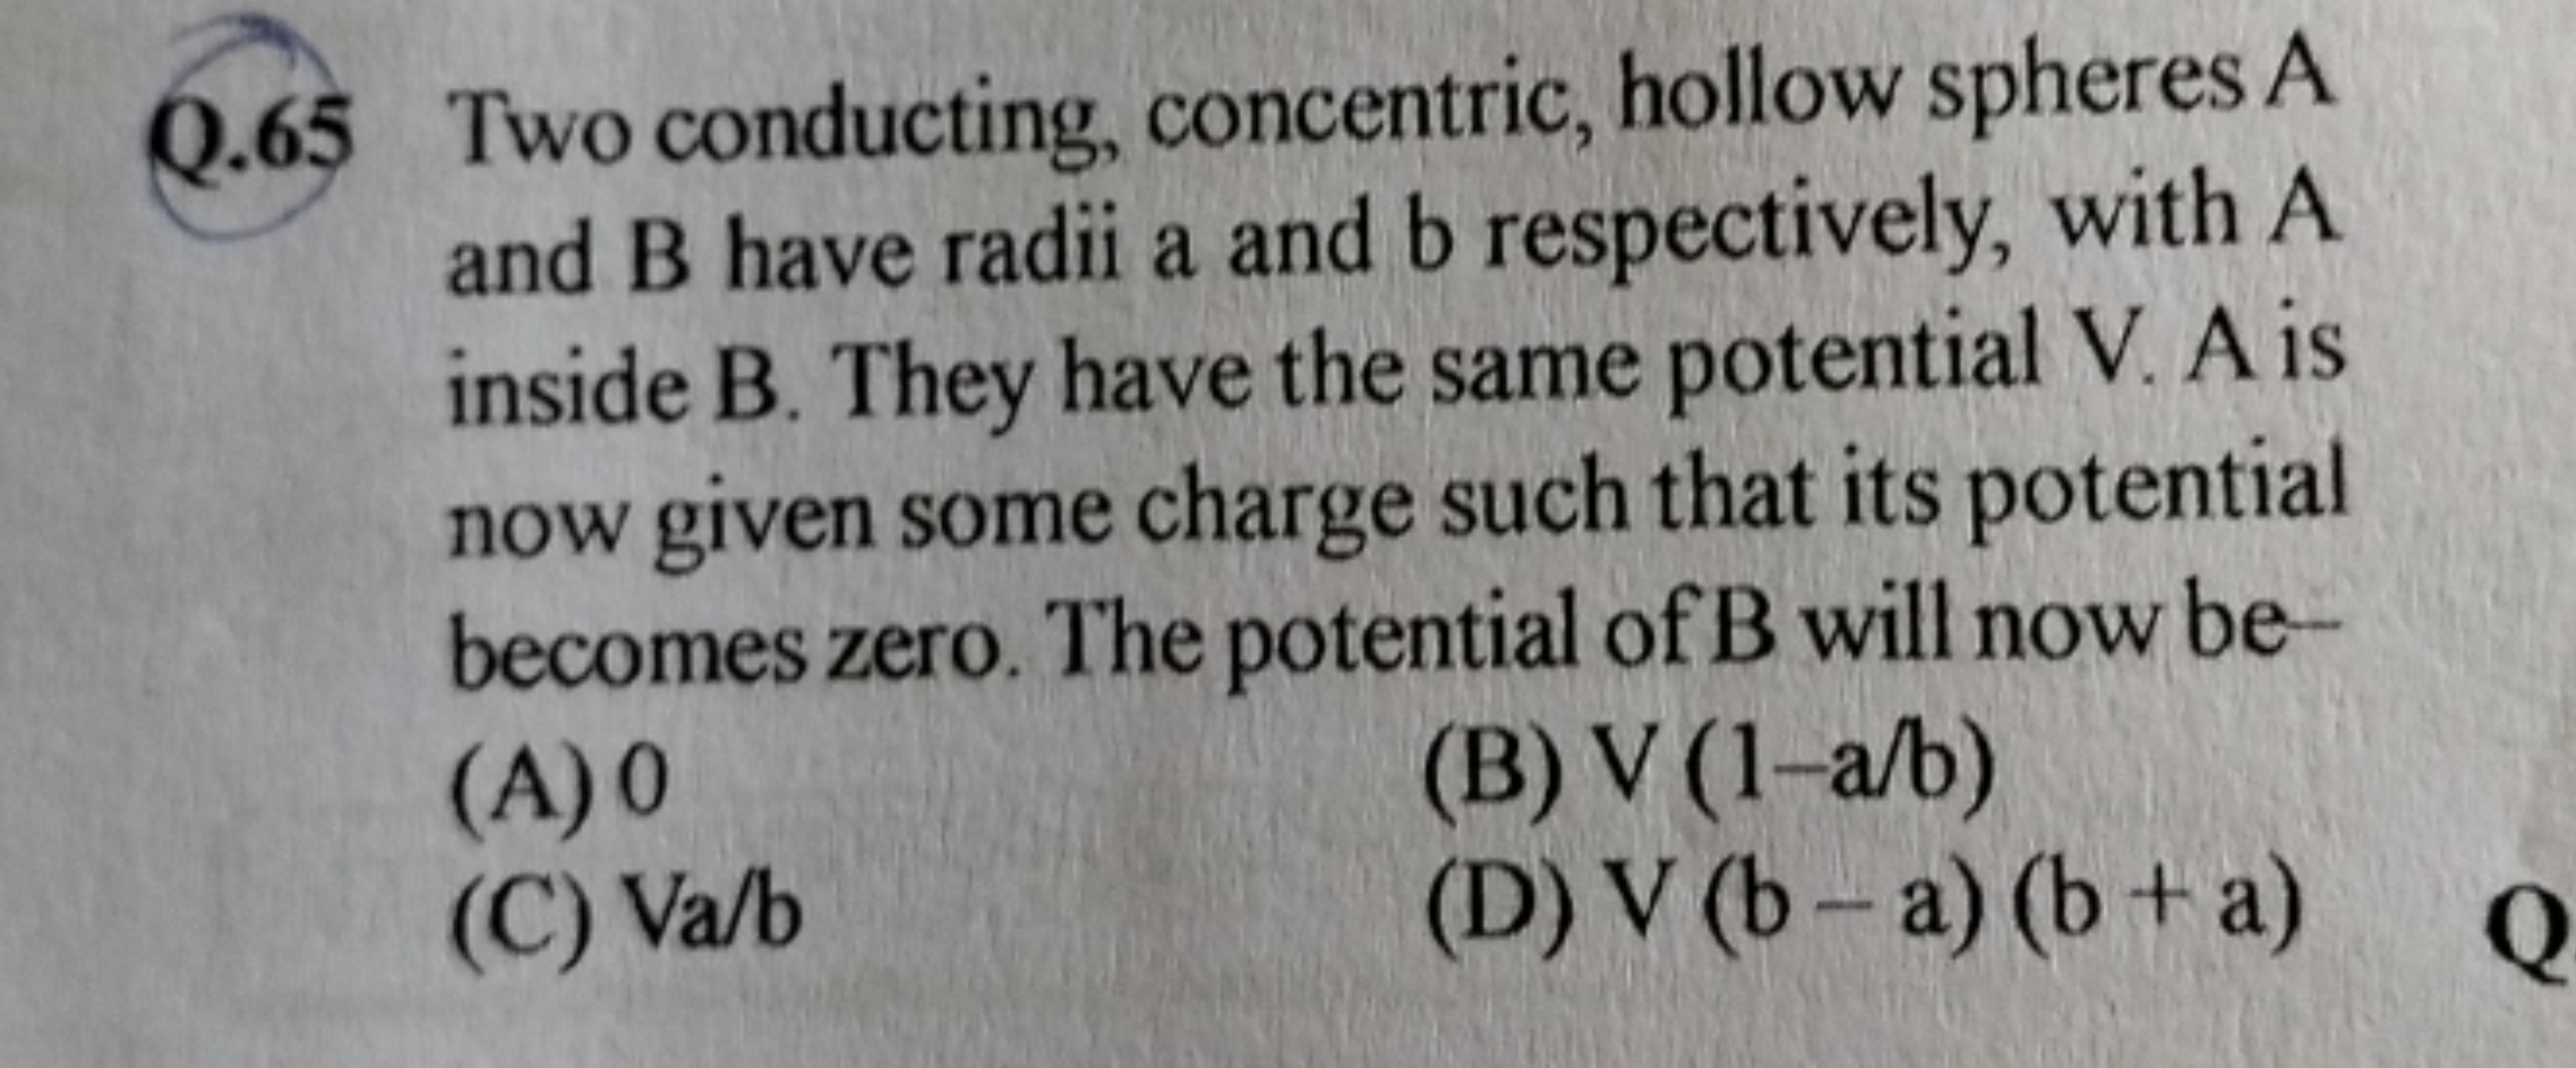 Q.65 Two conducting, concentric, hollow spheres A and B have radii a a